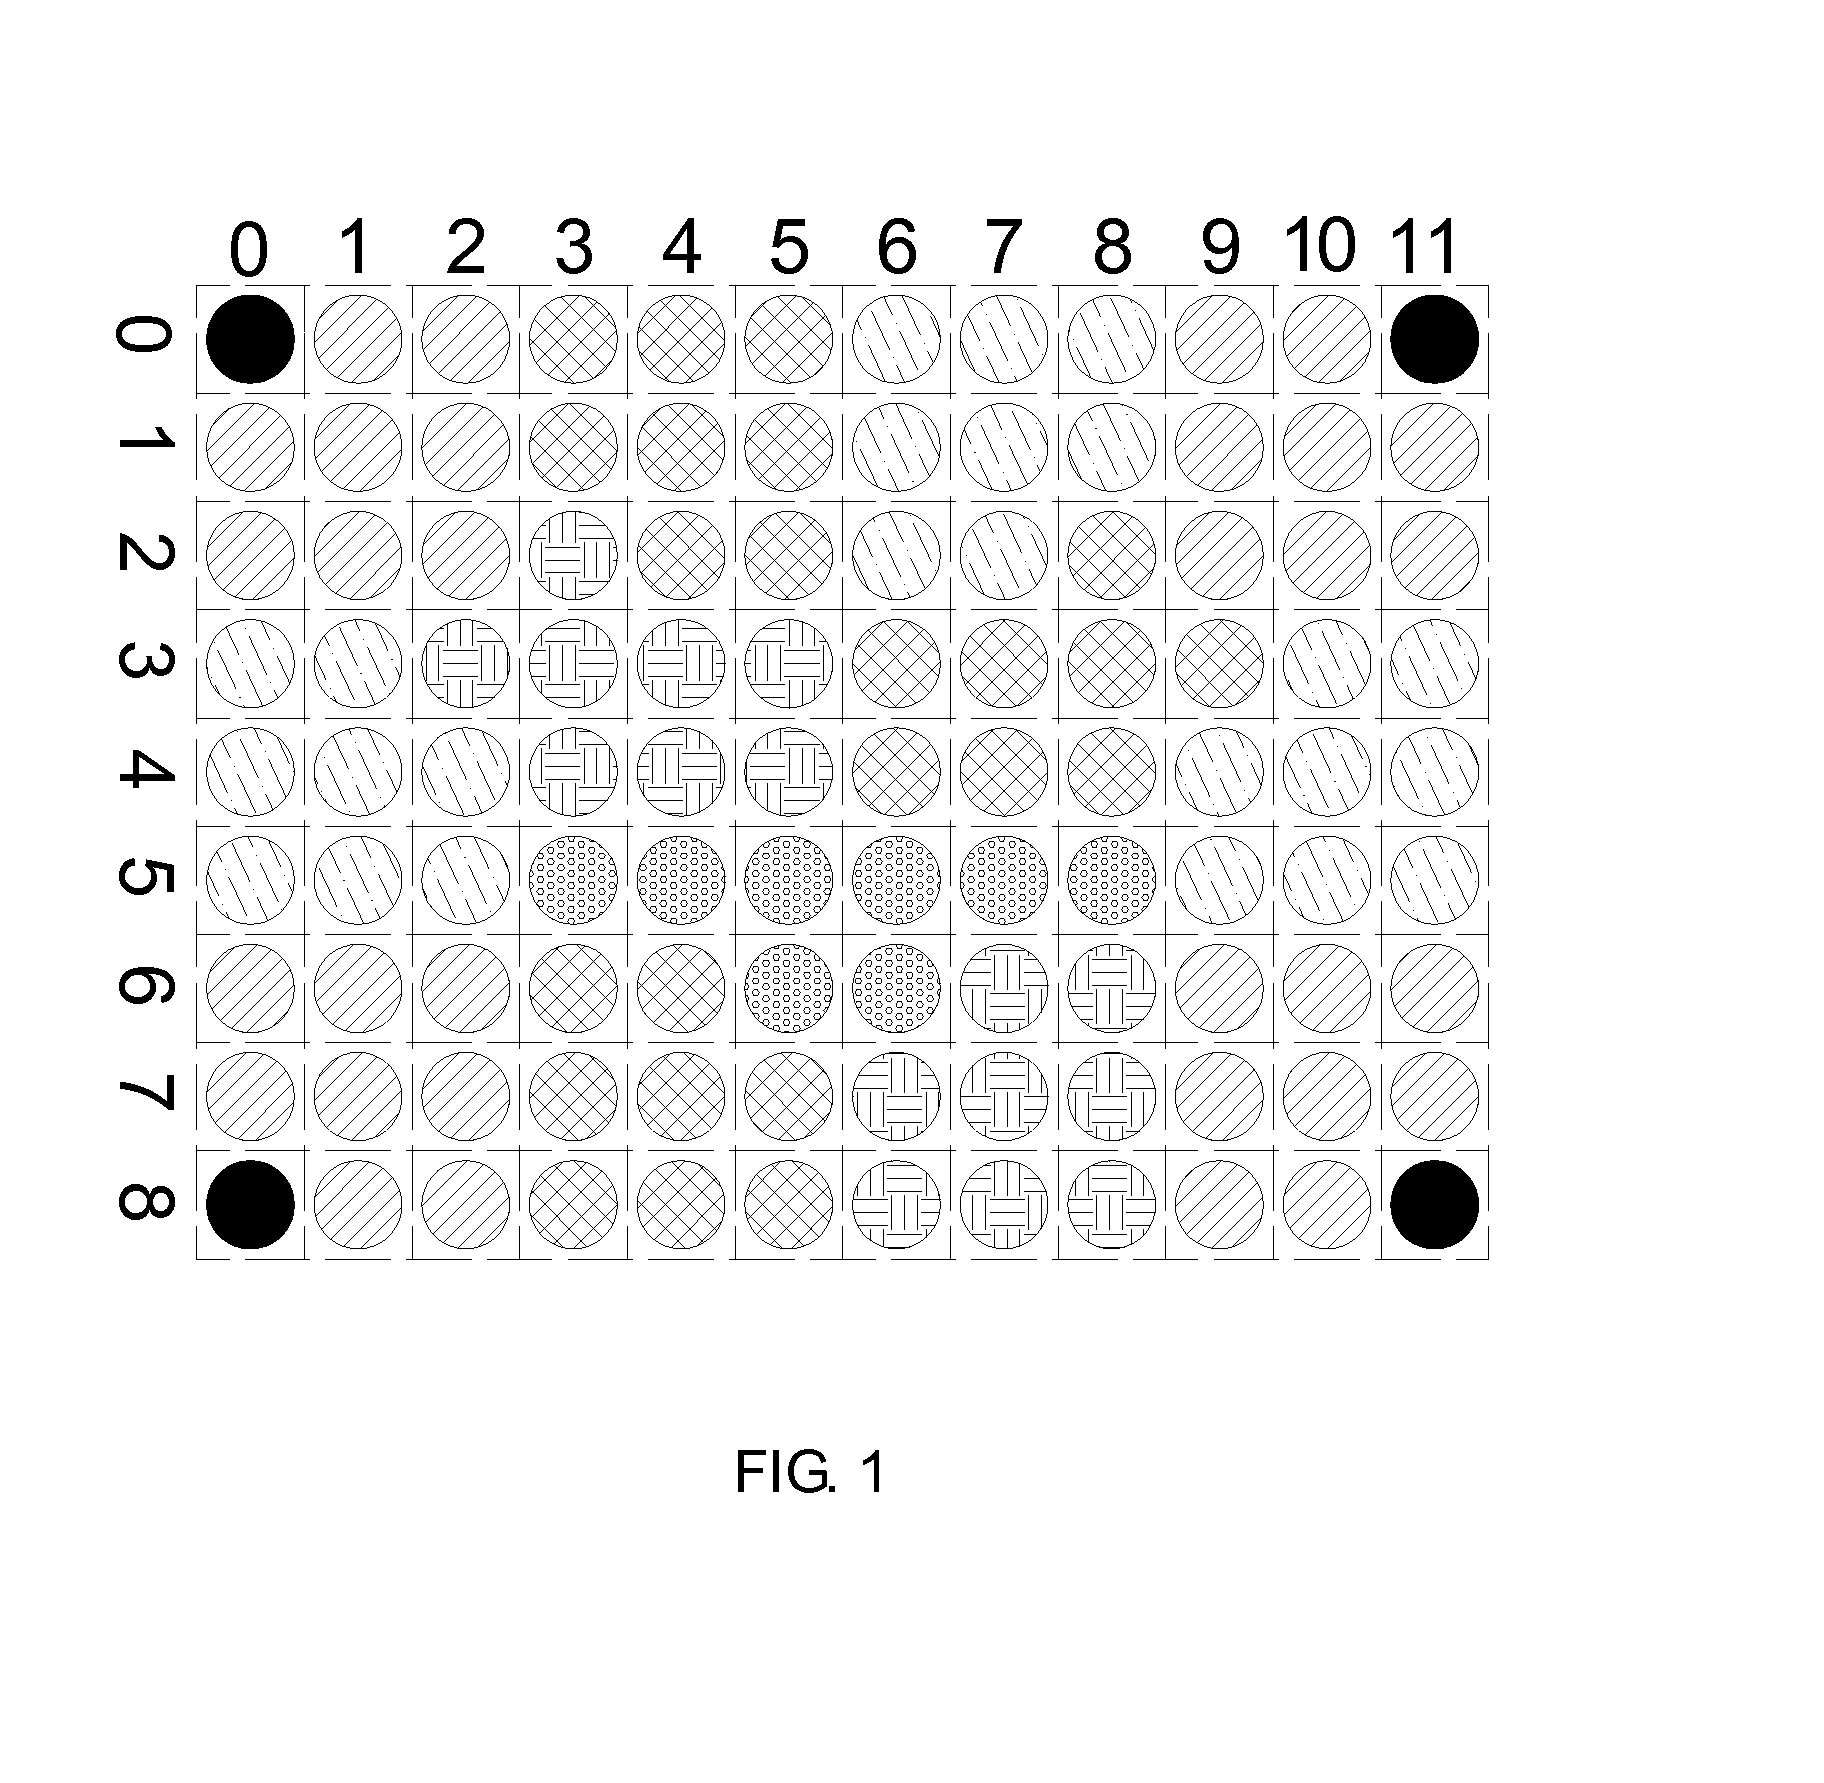 Two-directional bar code symbol and its encoding & decoding method